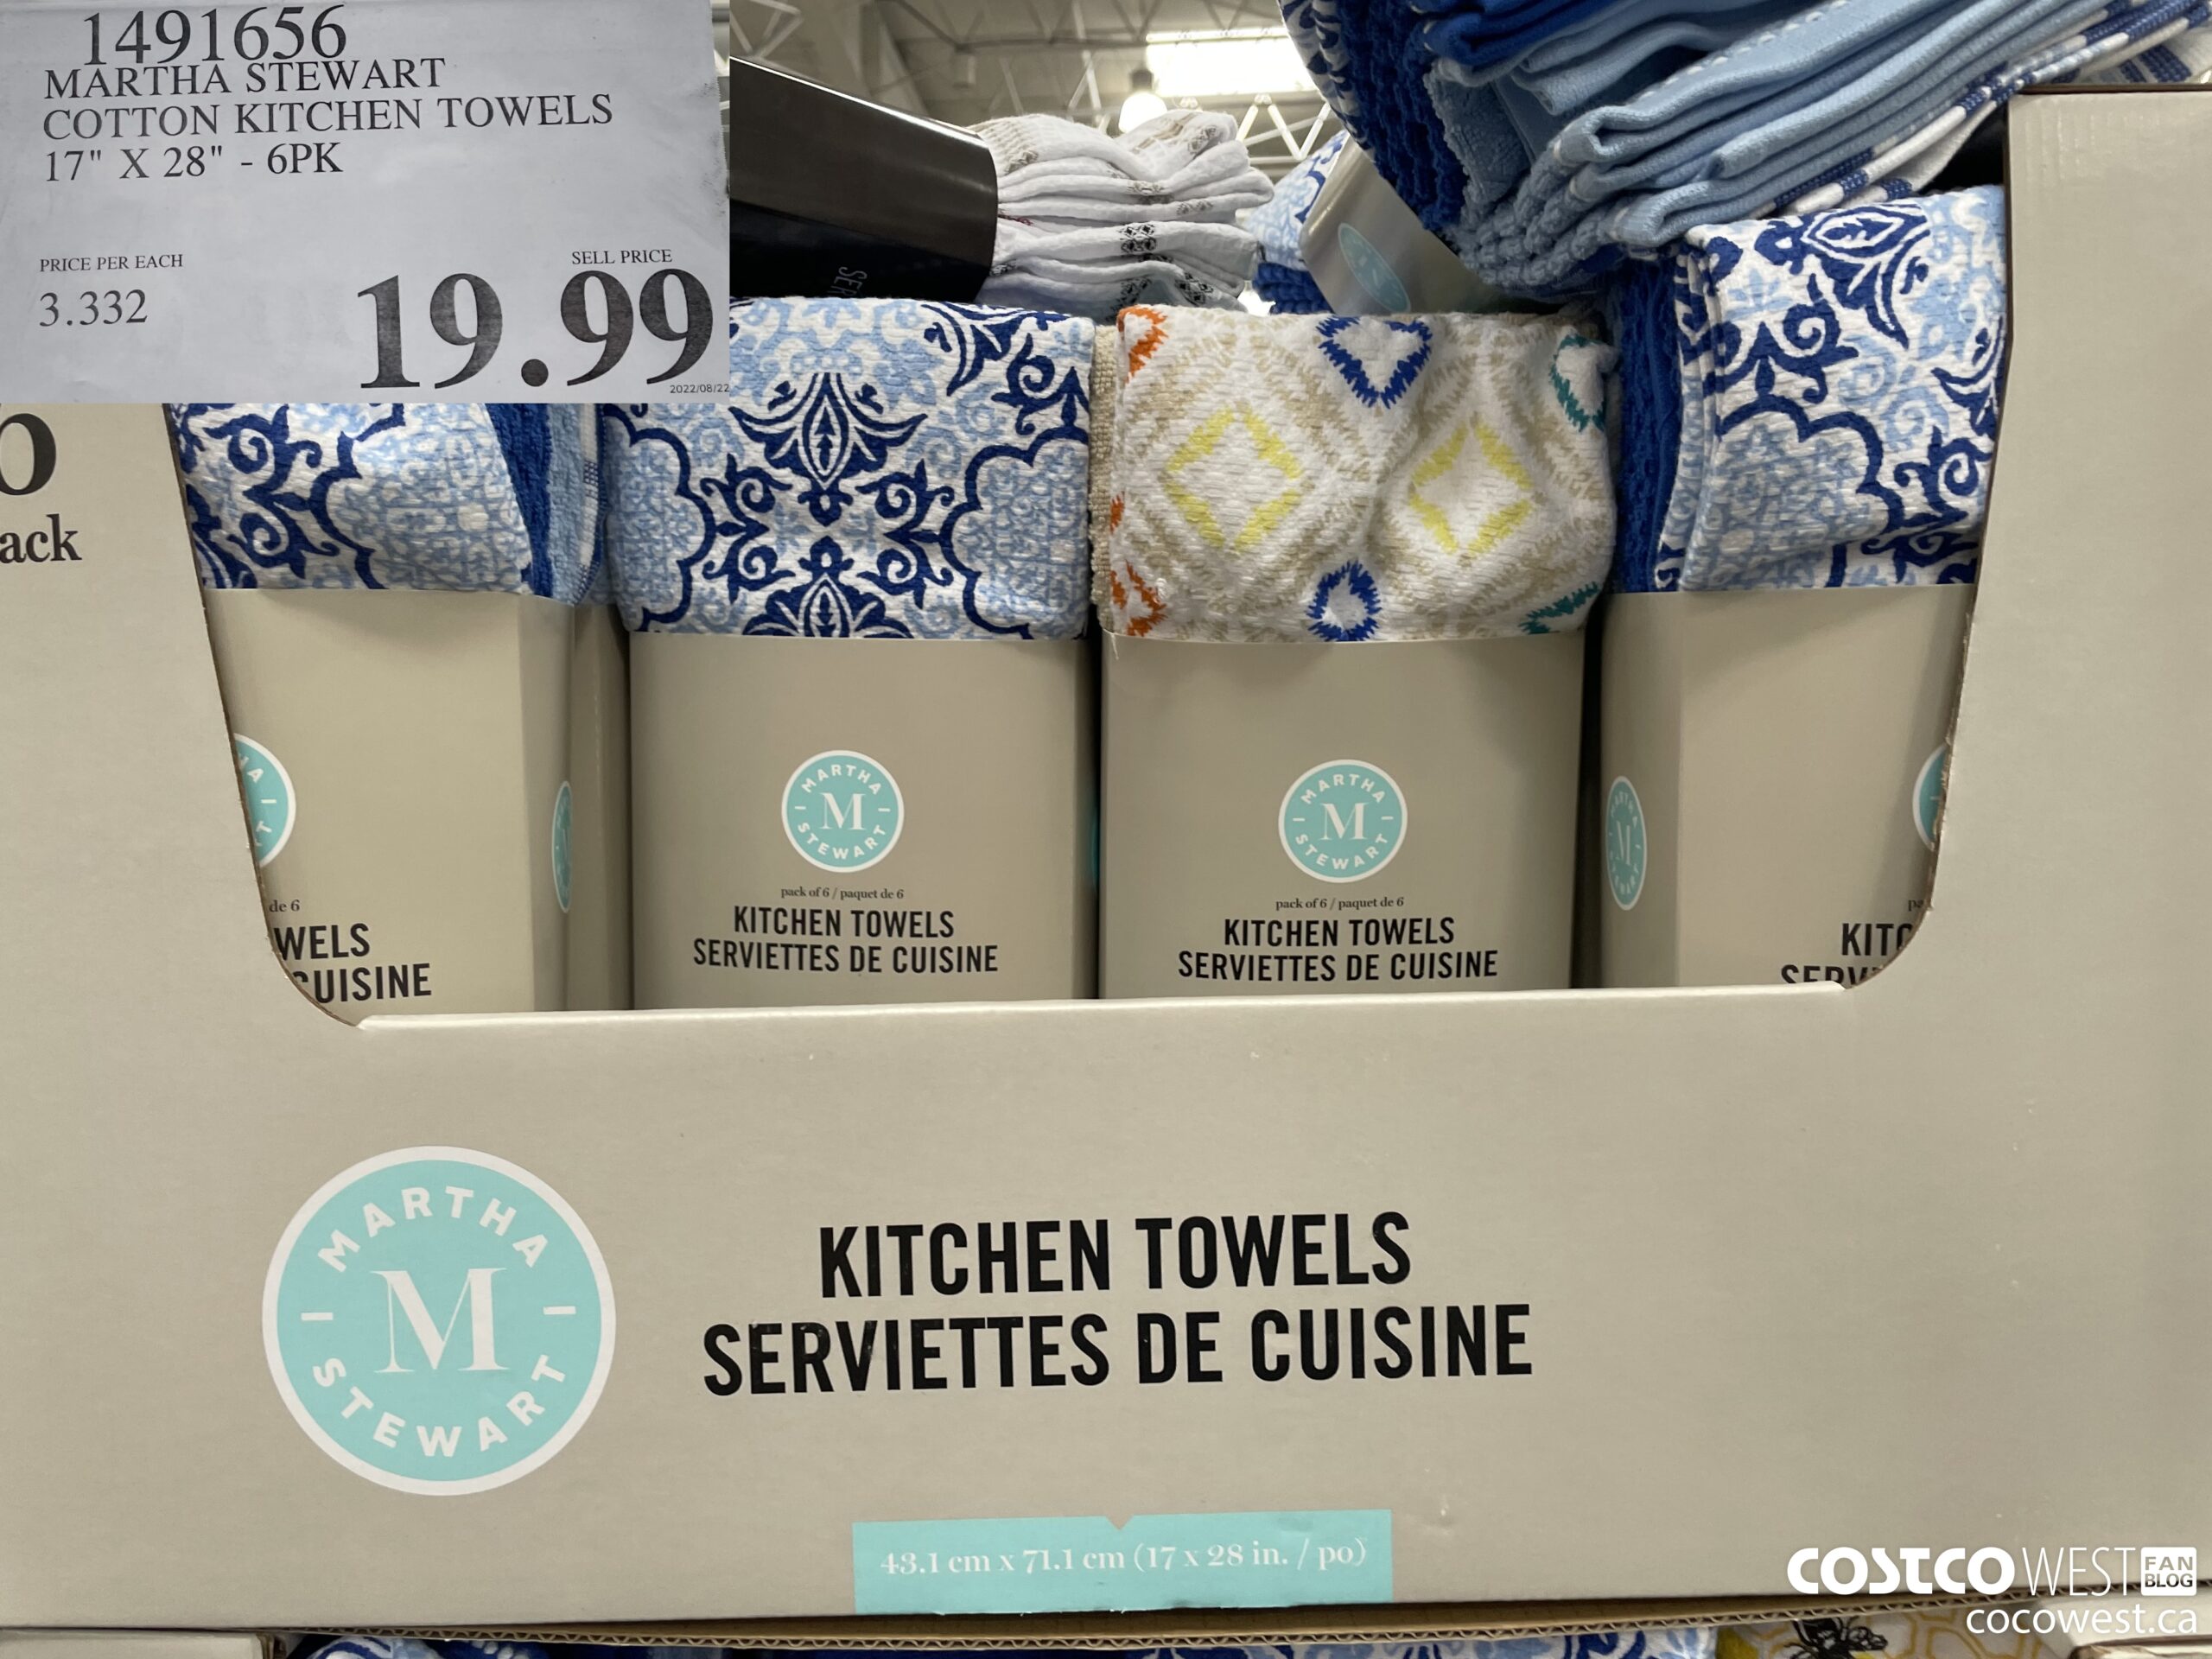 Costco Summer 2022 Superpost – The Entire Bedding, Sheets & Linen Section -  Costco West Fan Blog